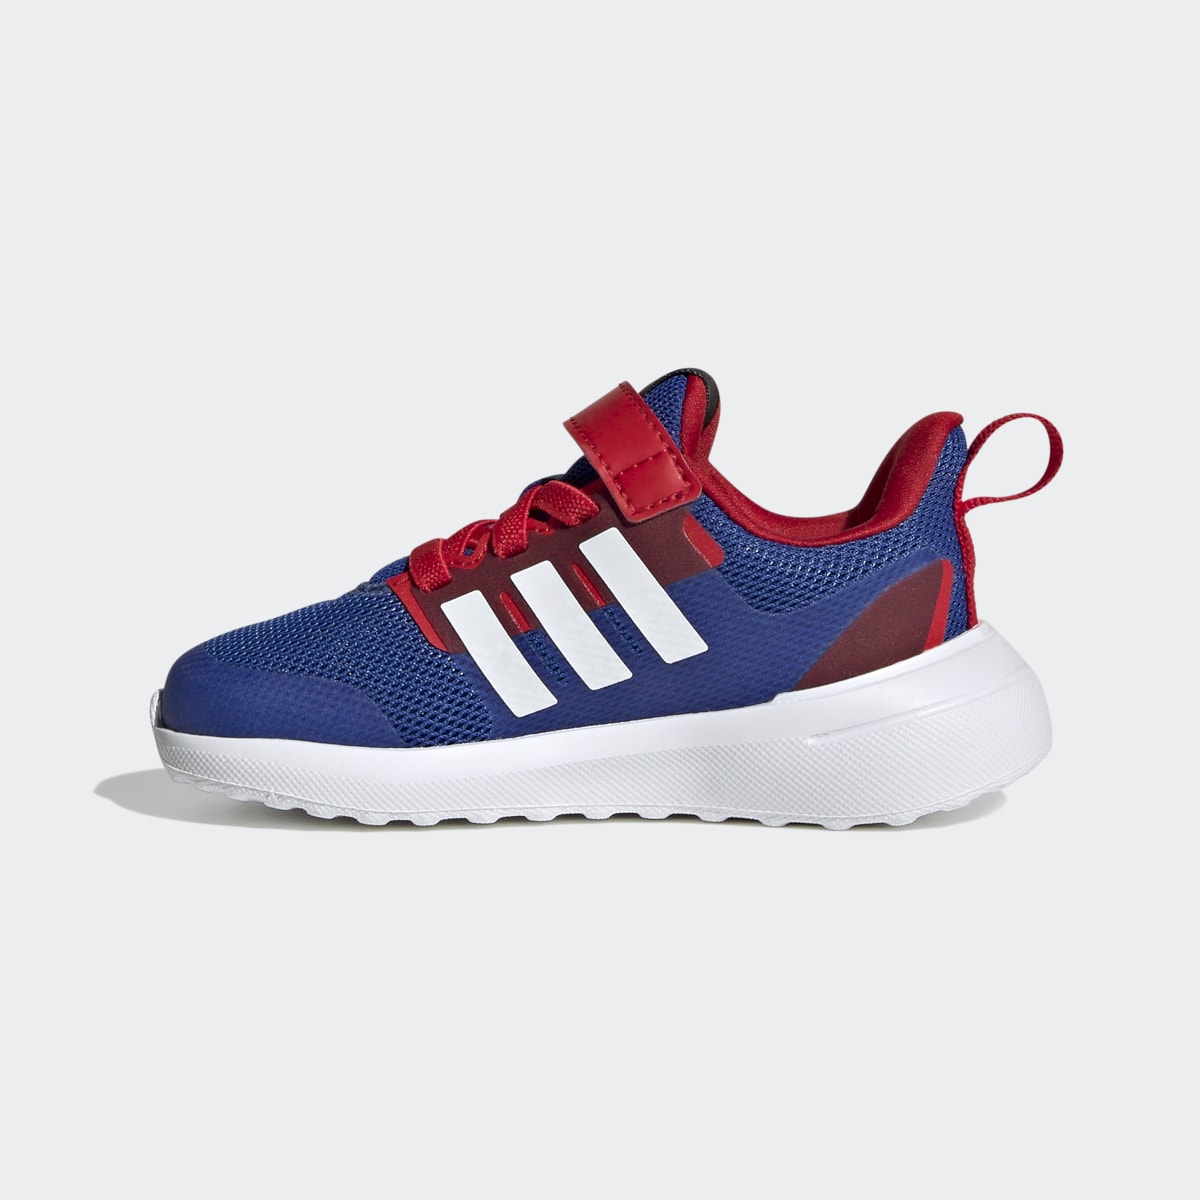 Adidas x Marvel FortaRun 2.0 Spider-Man Cloudfoam Elastic Lace Top Strap Shoes. 7